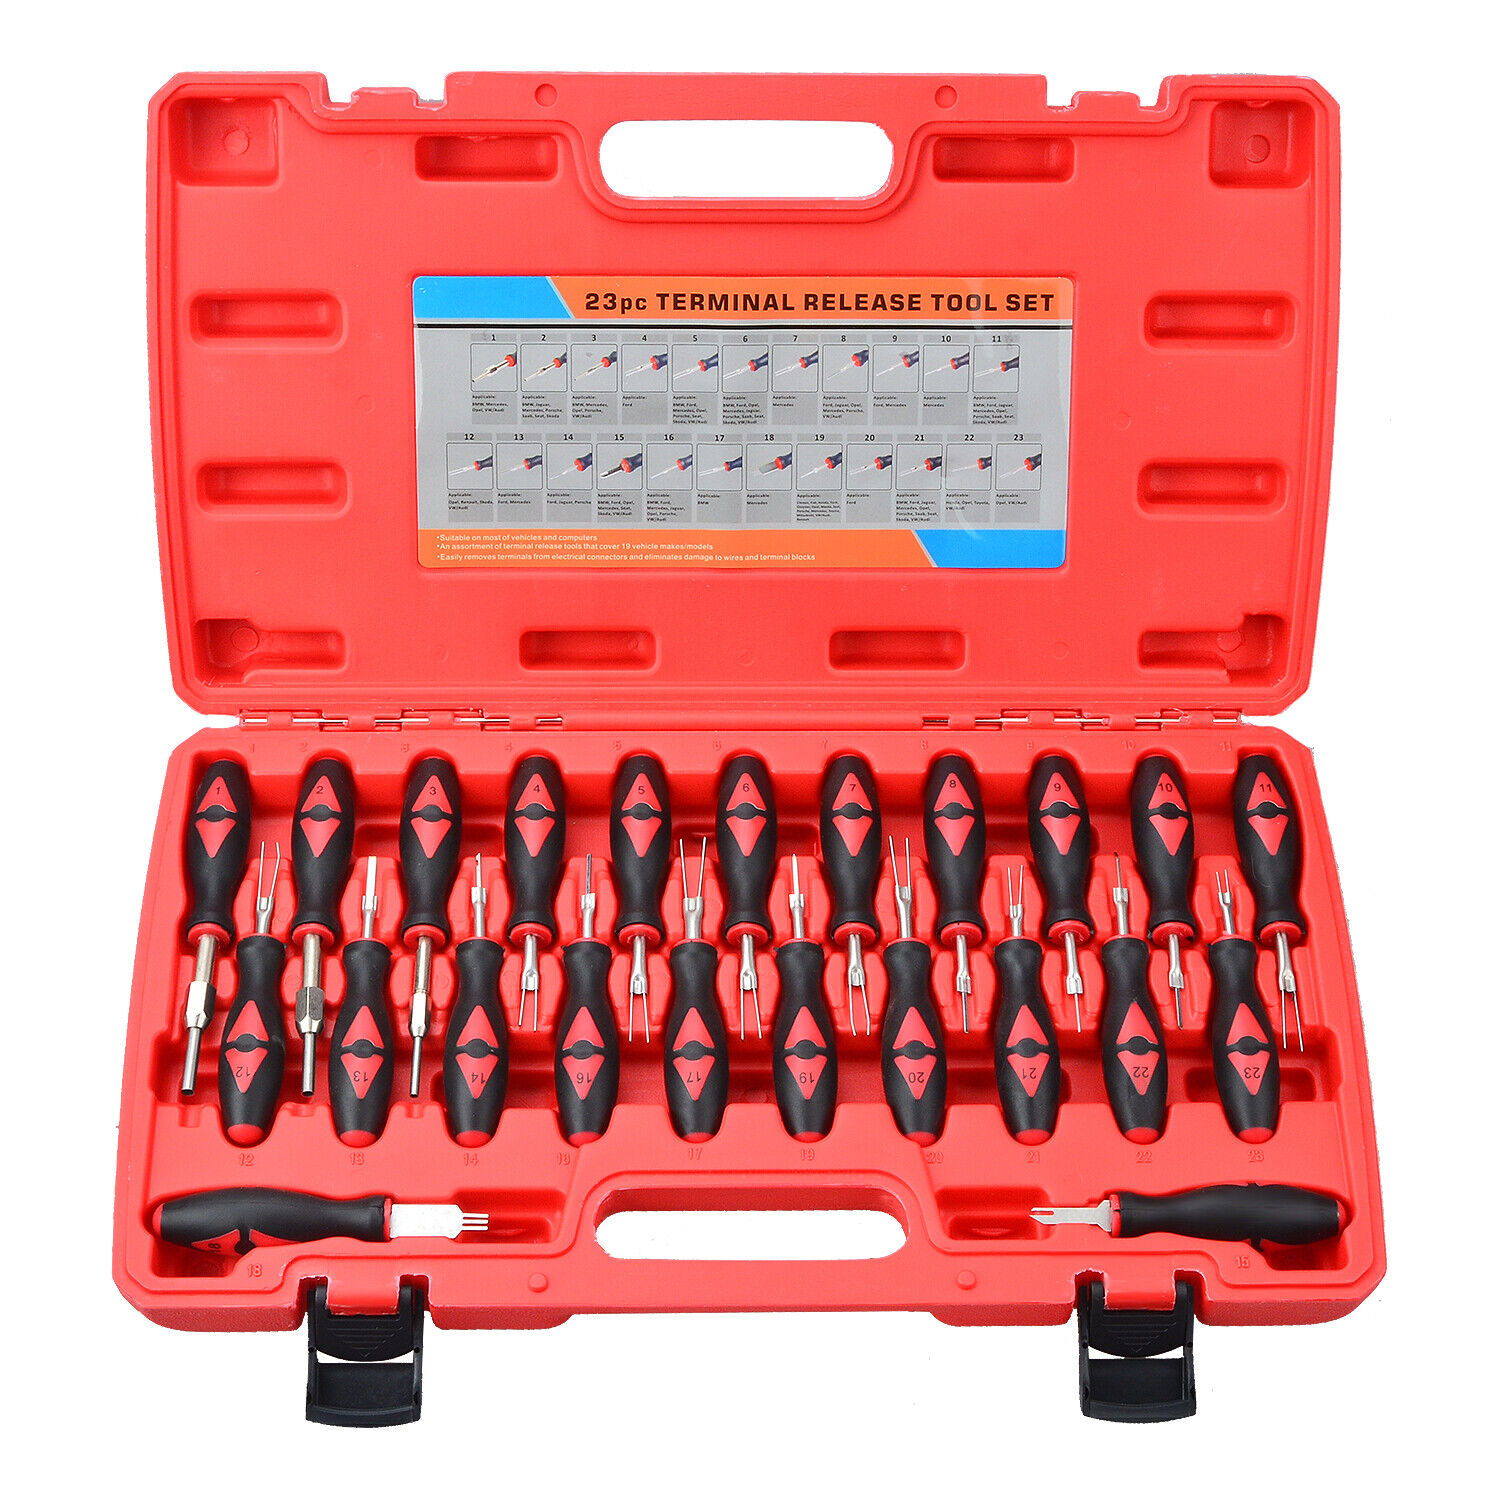  23 Pieces Universal Terminal Release Tool Set Electrical Connector Removal Kit